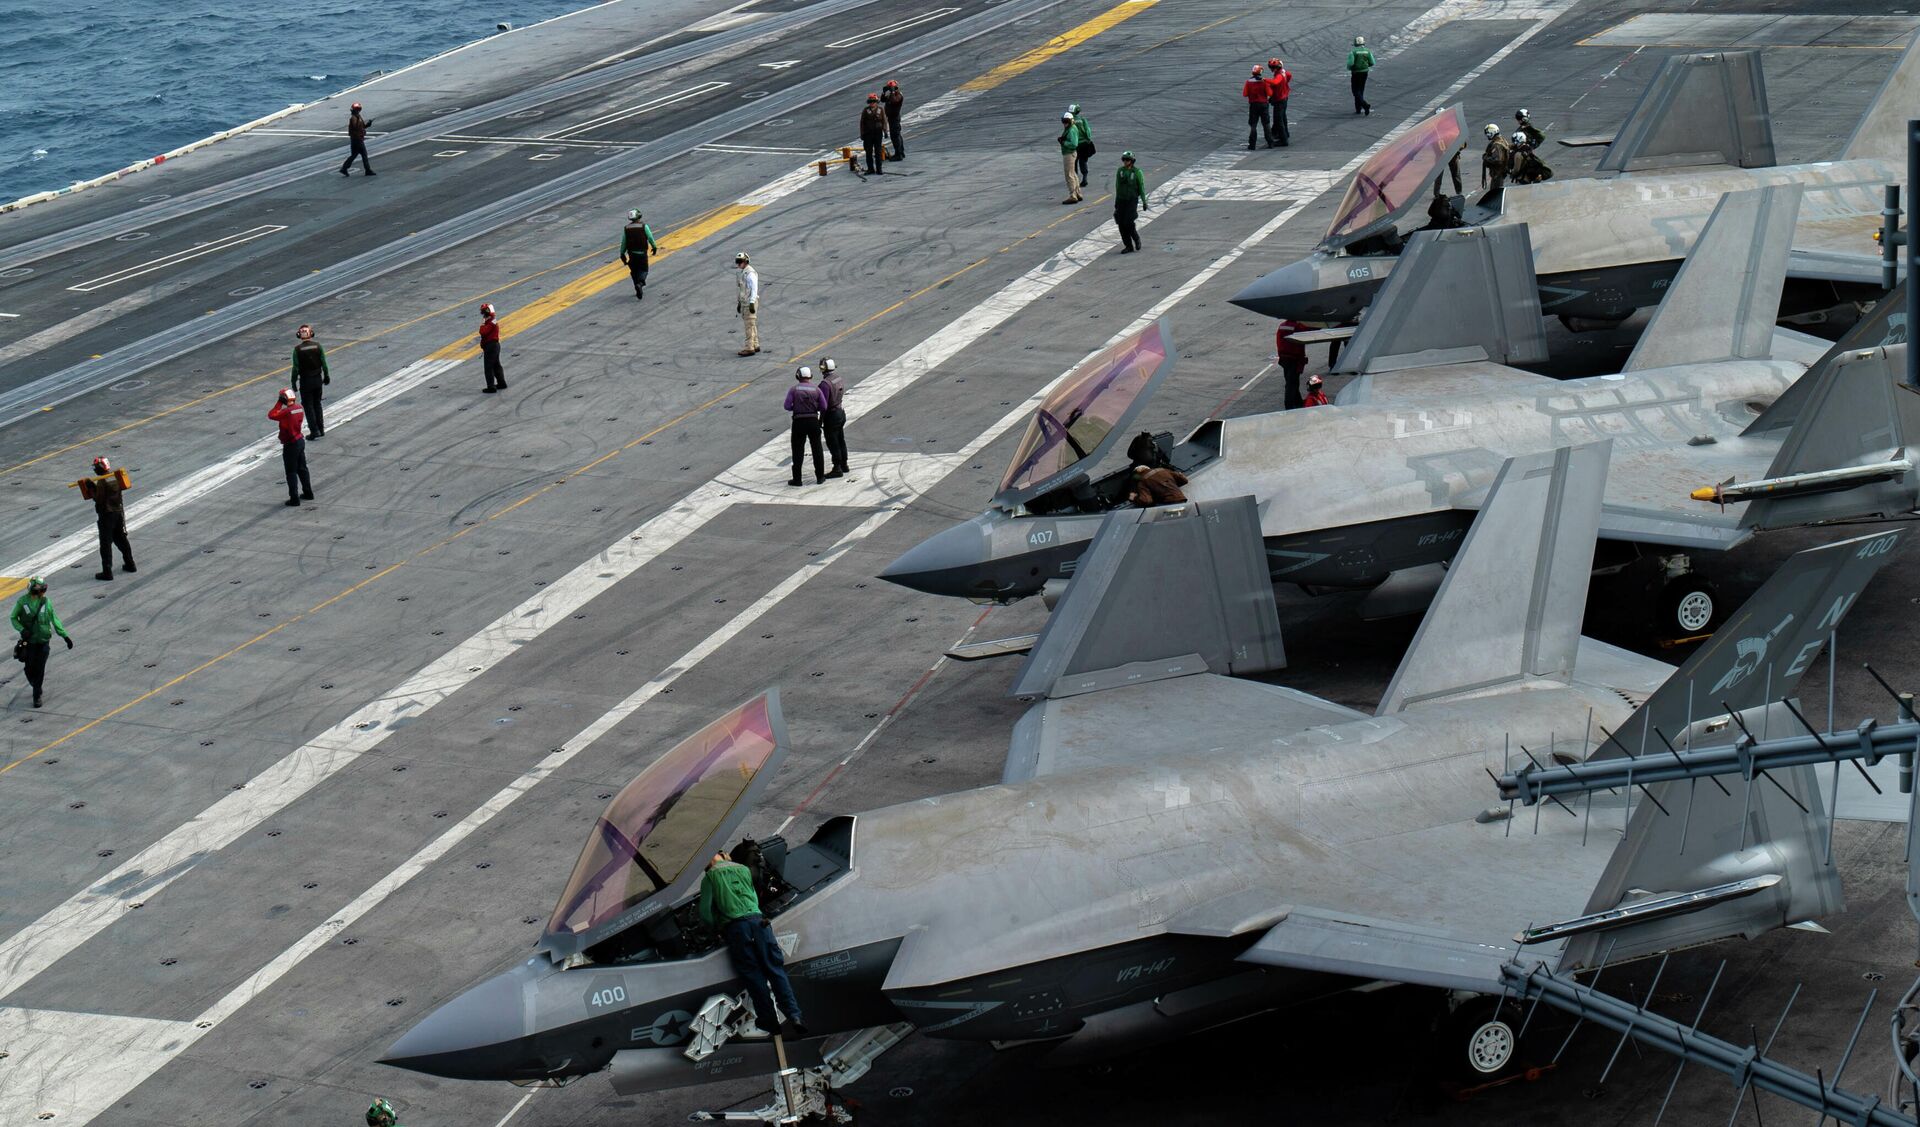 Three F-35C Joint Strike Fighters on the USS Carl Vinson in the South China Sea on January 14, 2022. - Sputnik International, 1920, 01.02.2022